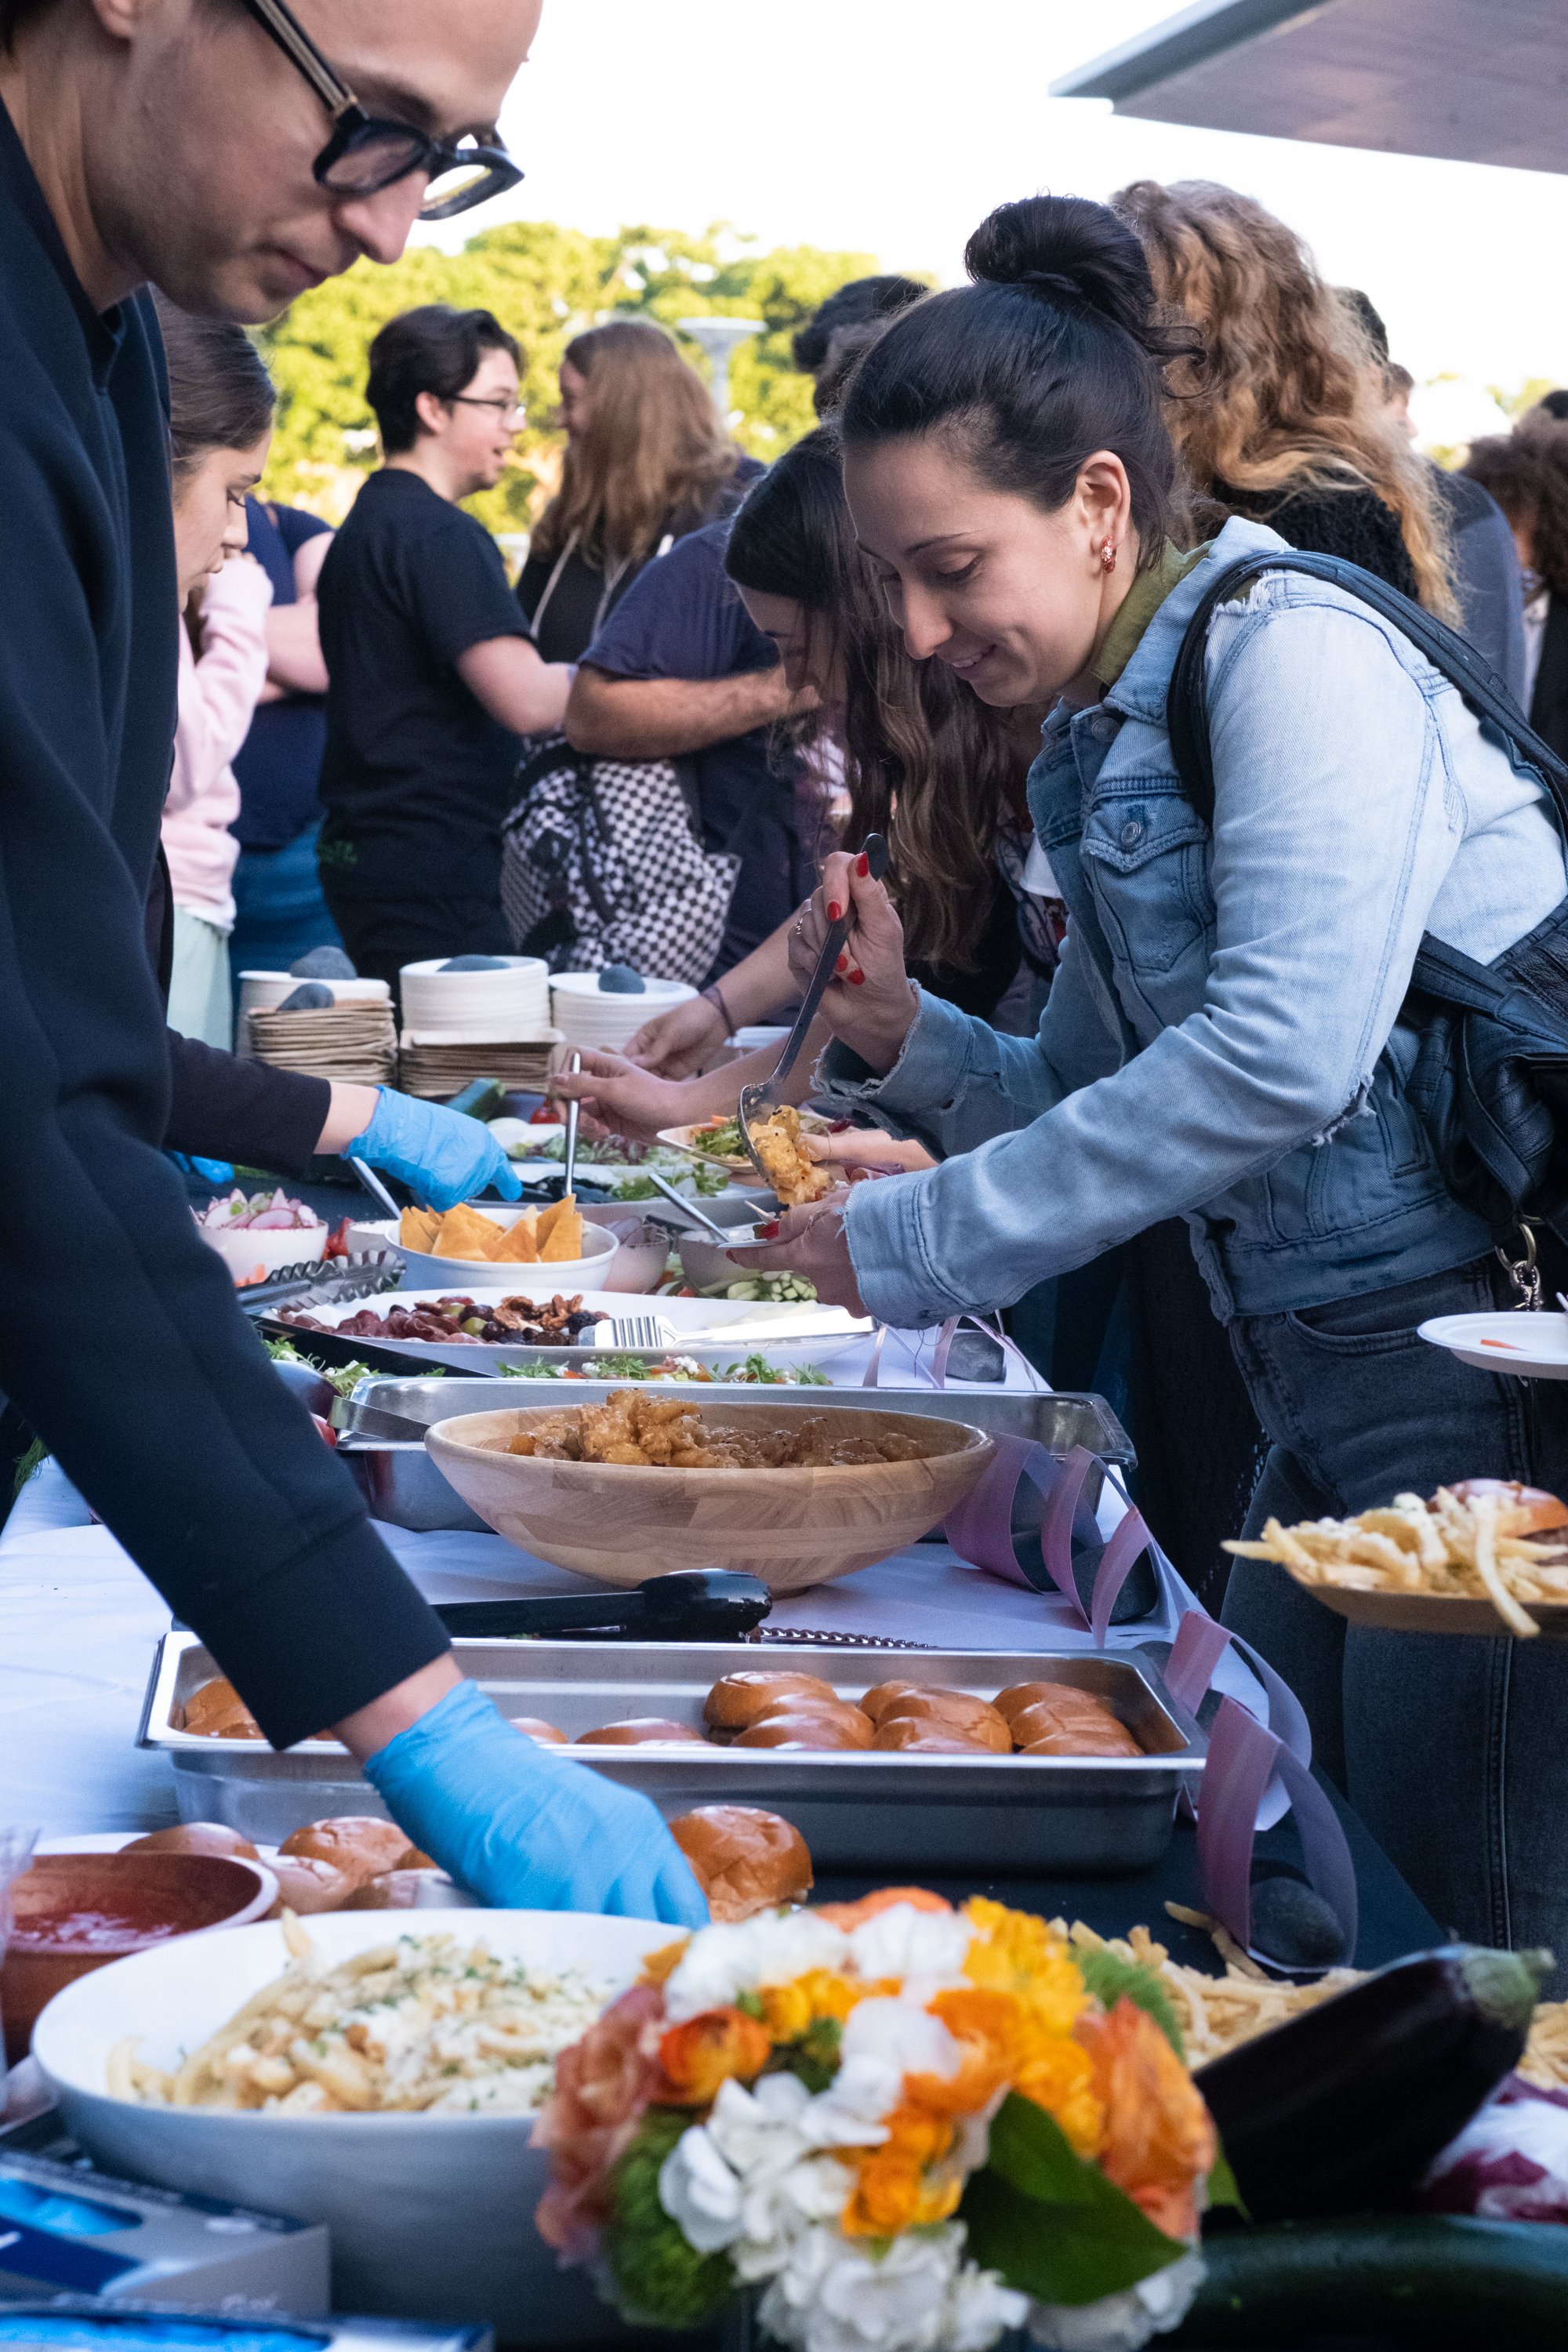  After the talk given by Matika Wilbur, author of "Project 562, Changing The Way We See Native America", on Monday, May 8th, 2023, dinner was served in the courtyard of the Santa Monica College Performing Arts Center in Santa Monica, Calif. Patrons e